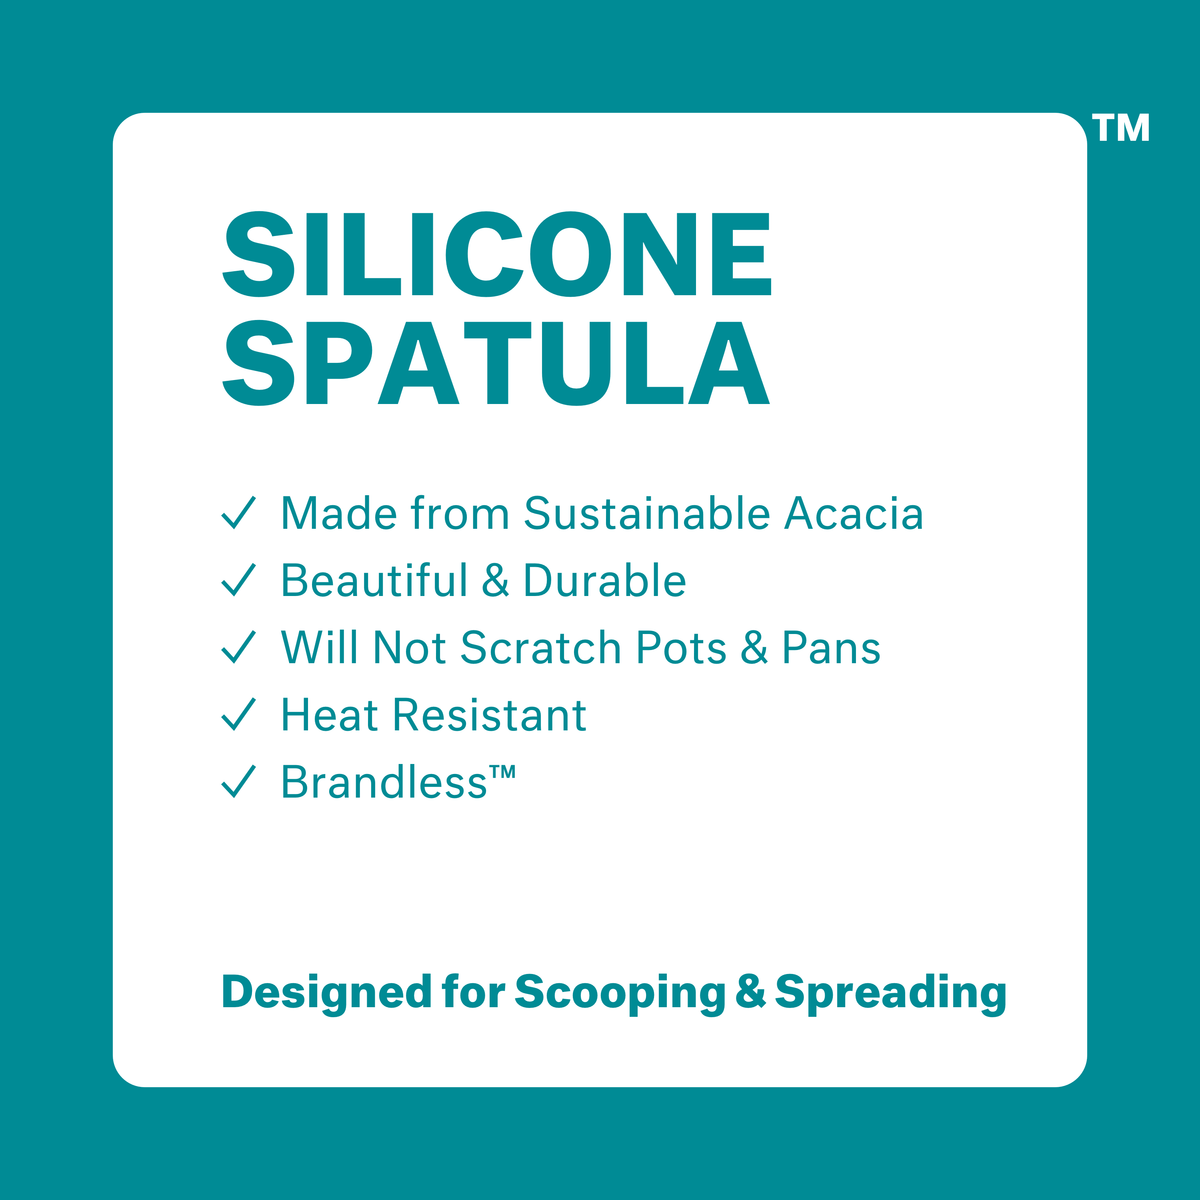 Silicone Spatula: made from sustainable acacia, beautiul &amp; durable, will not scratch pots &amp; pans, heat resistant, brandless. Designed for scooping and spreading.